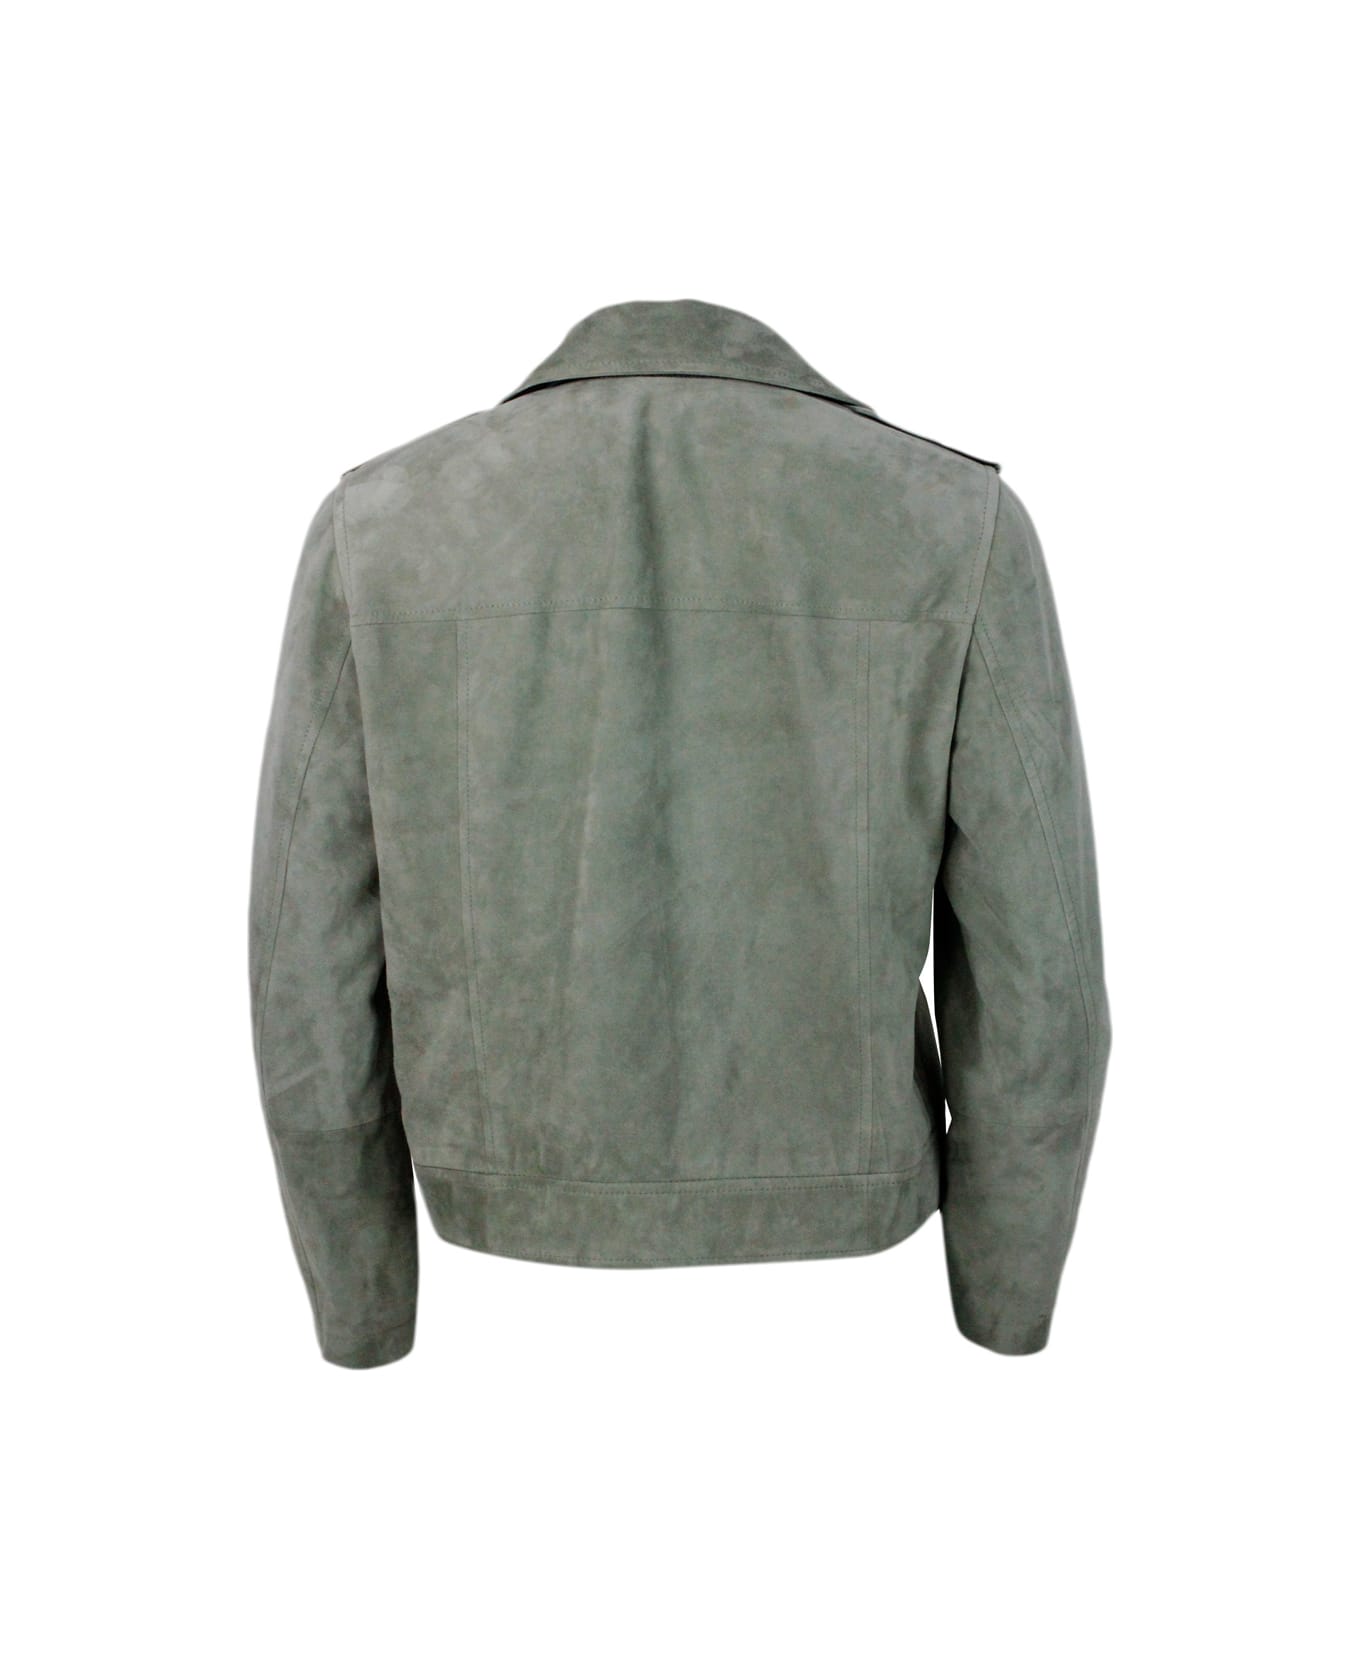 Brunello Cucinelli Biker Jacket In Precious And Soft Suede With Rows Of Brilliant Monili Behind The Neck - Green